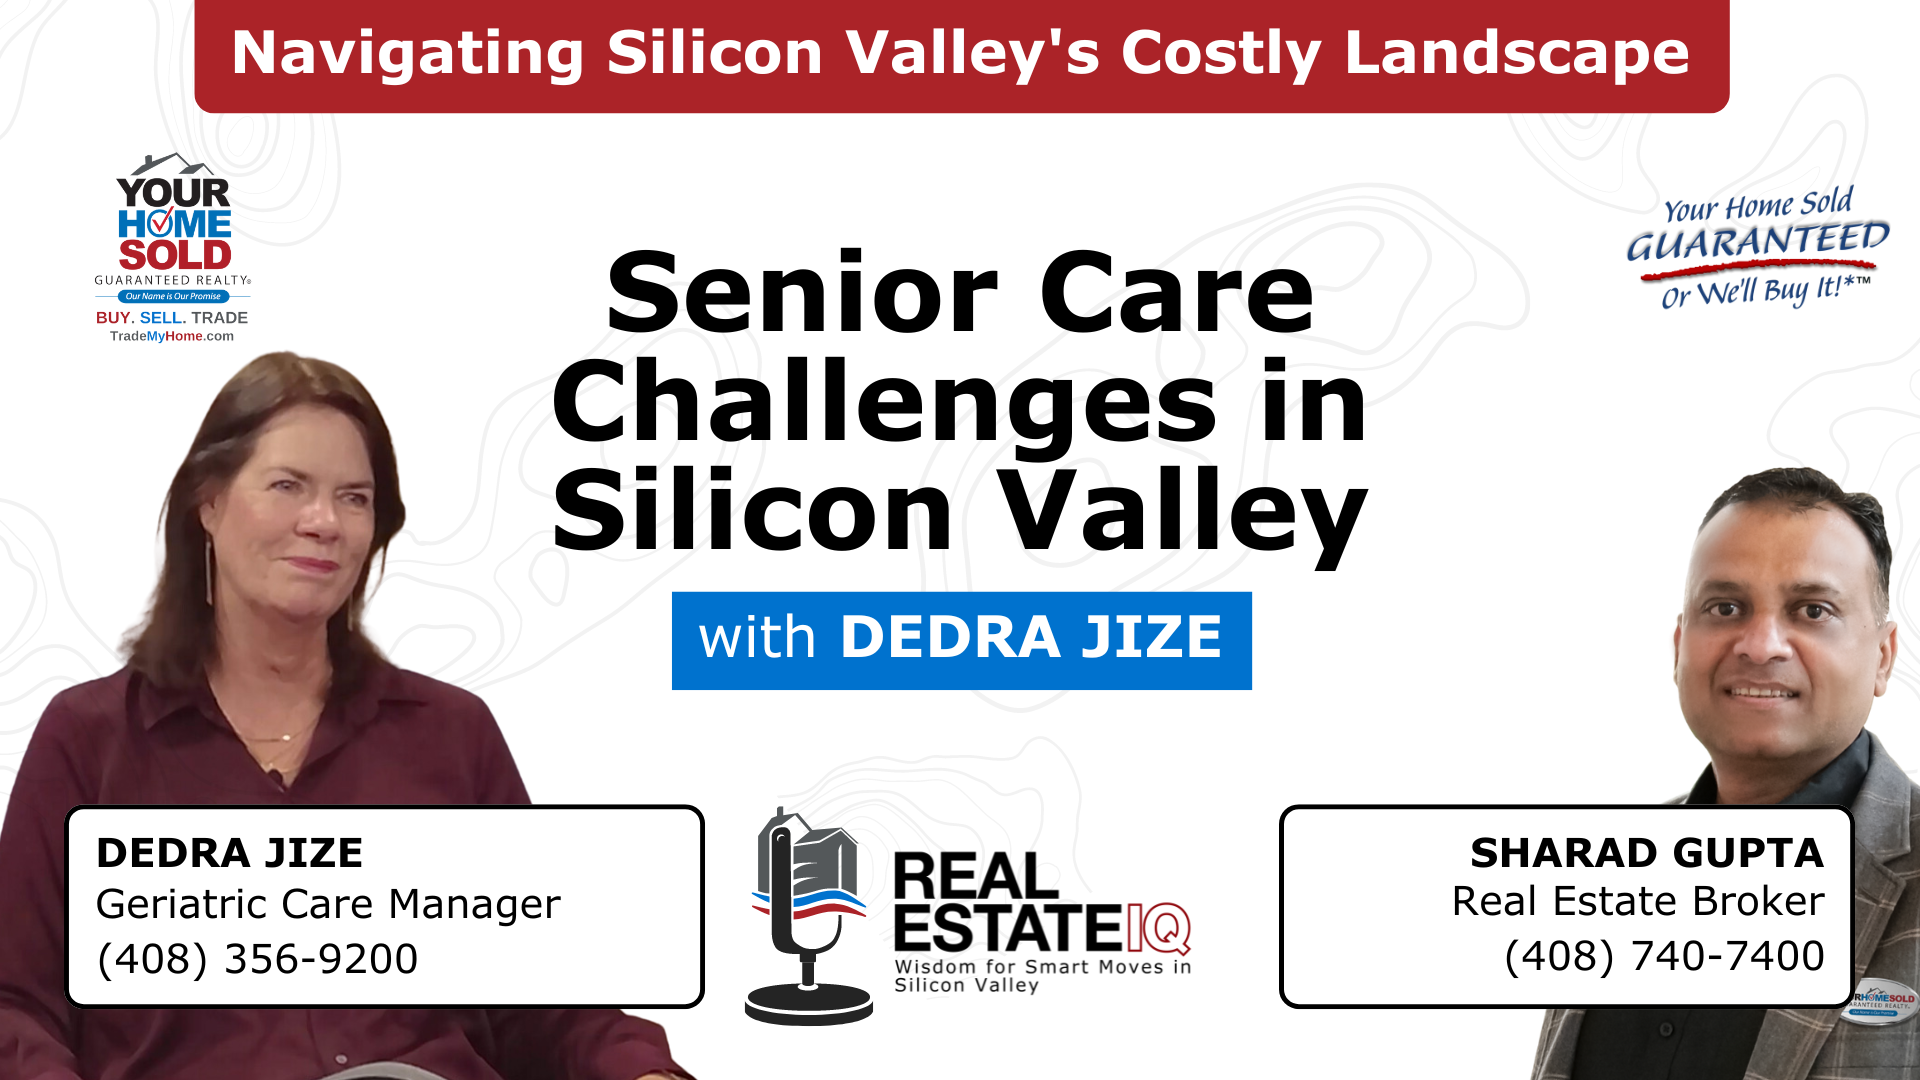 Senior Care Challenges: Navigating Silicon Valley’s Costly Landscape